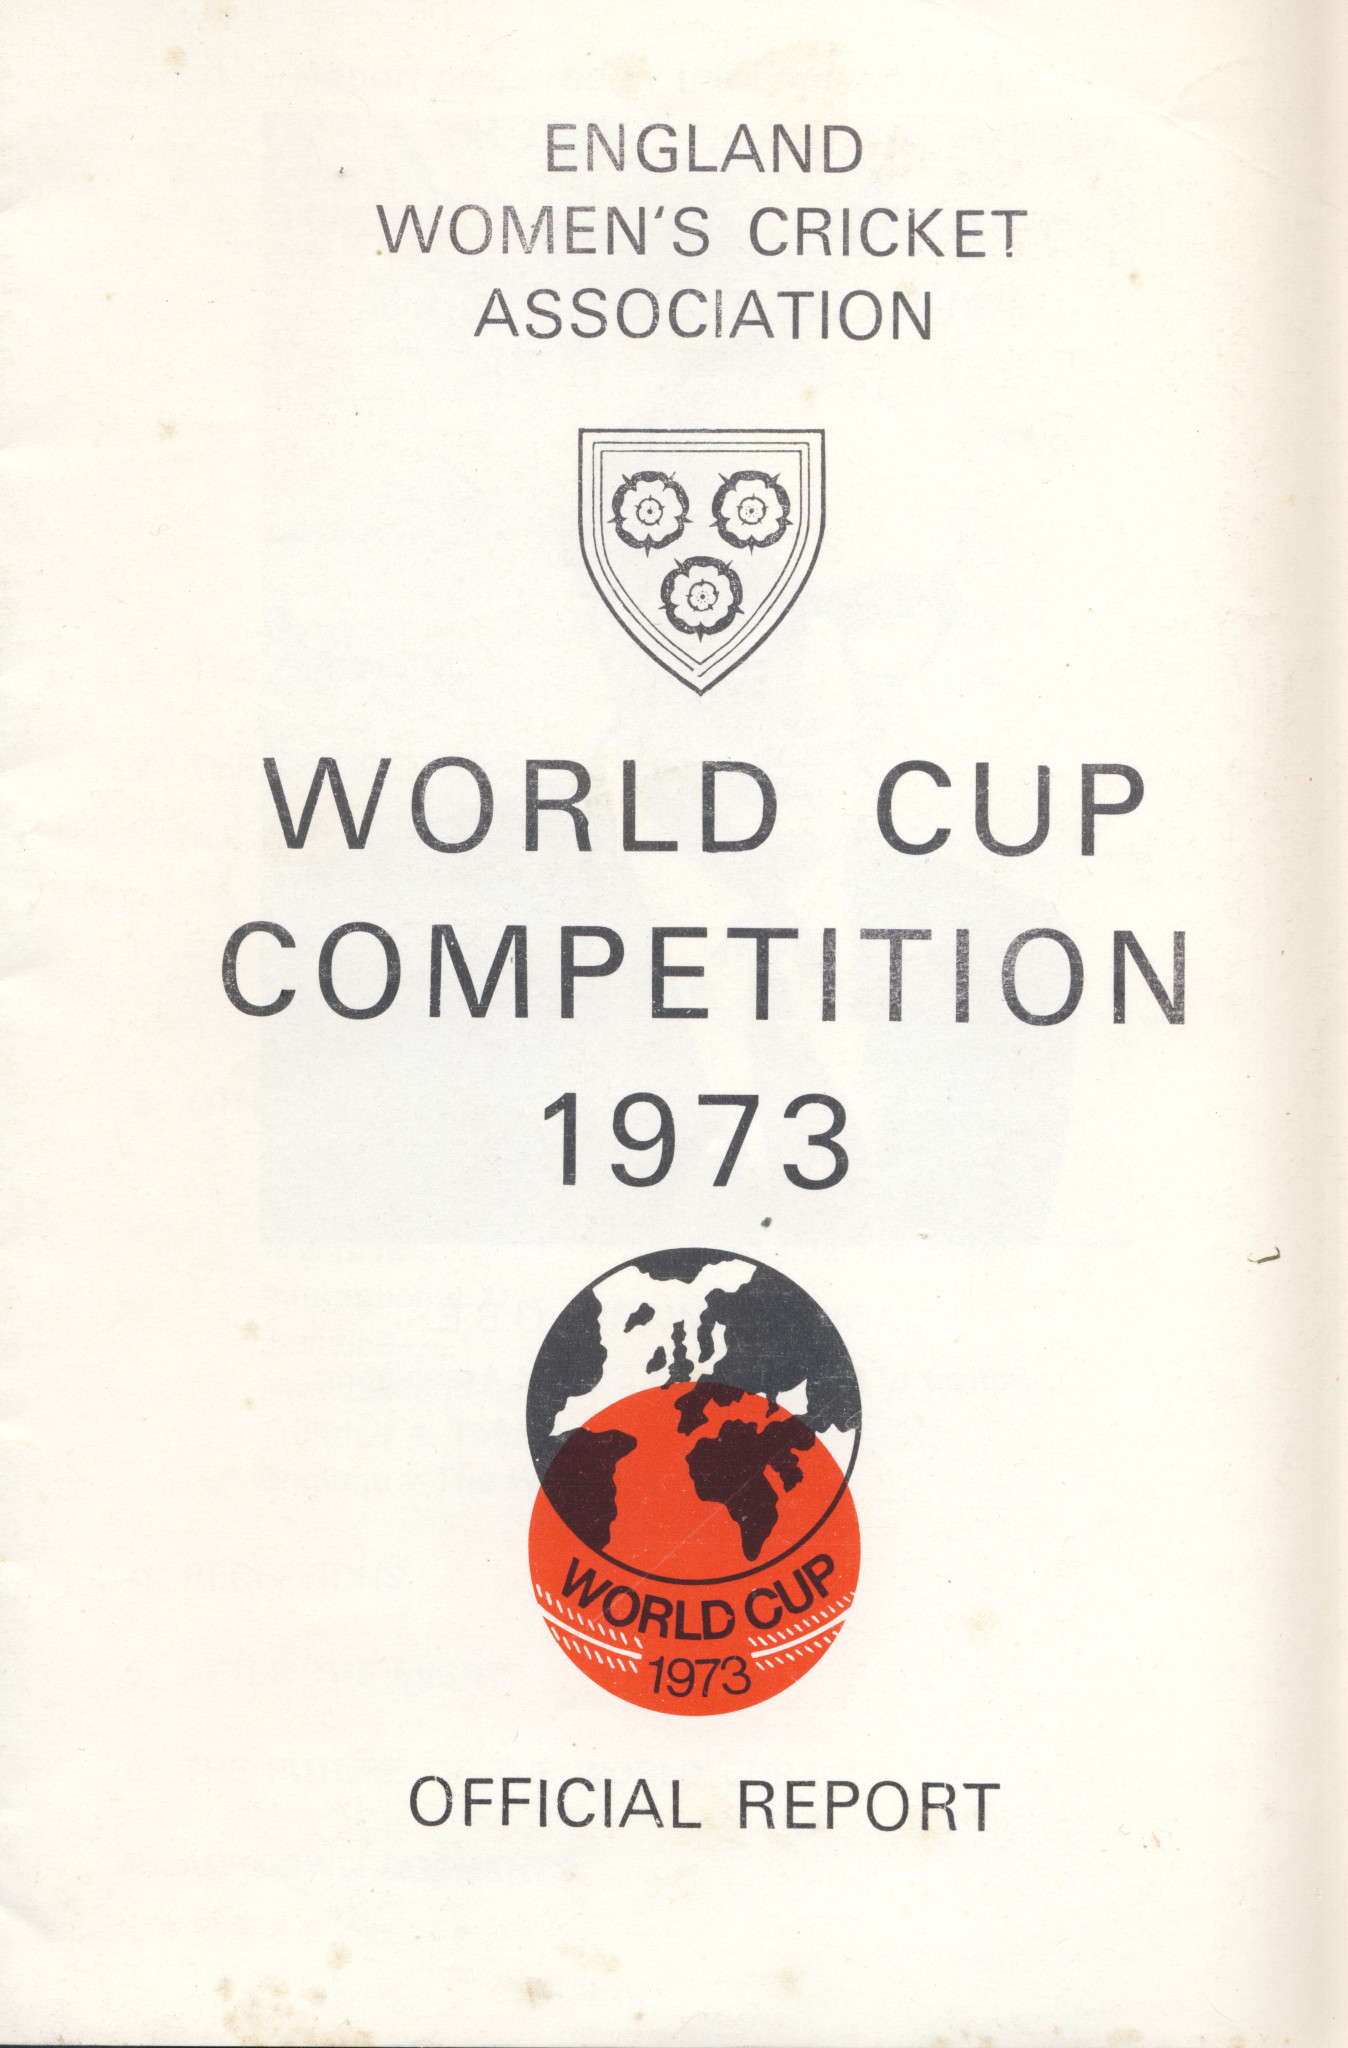 Organisers hoped that the 1973 World Cup would put women's cricket "on the map" ©Women's Cricket Association 